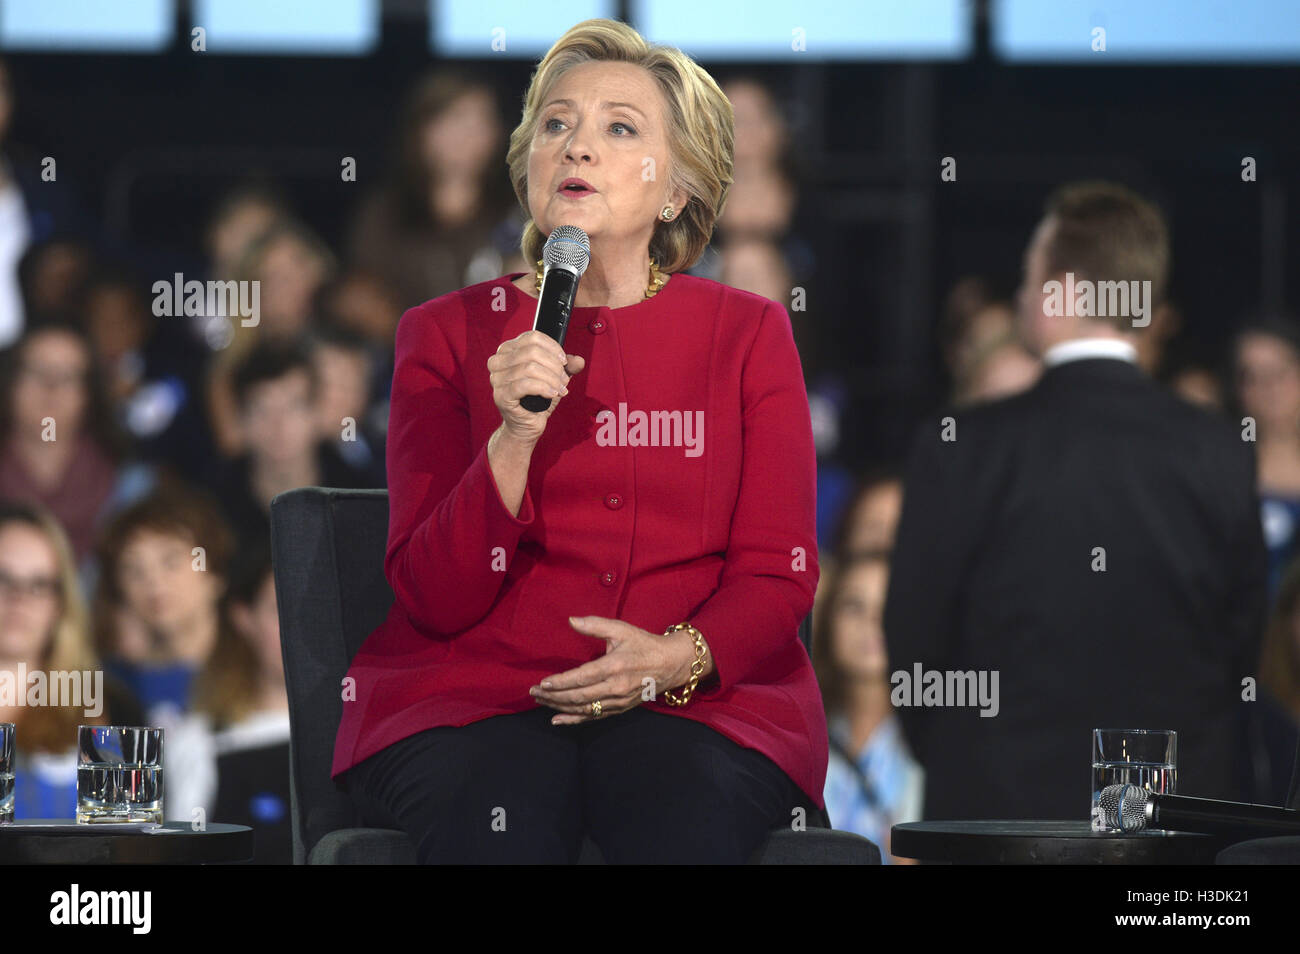 Haverford, USA. 4th Oct, 2016. Hillary Clinton holds a conversation with families about her agenda to support children and families and create an economy that works for everyone at Haverford Community Recreation & Environmental Center on October 4, 2016 in Haverford, USA. | Verwendung weltweit/picture alliance © dpa/Alamy Live News Stock Photo